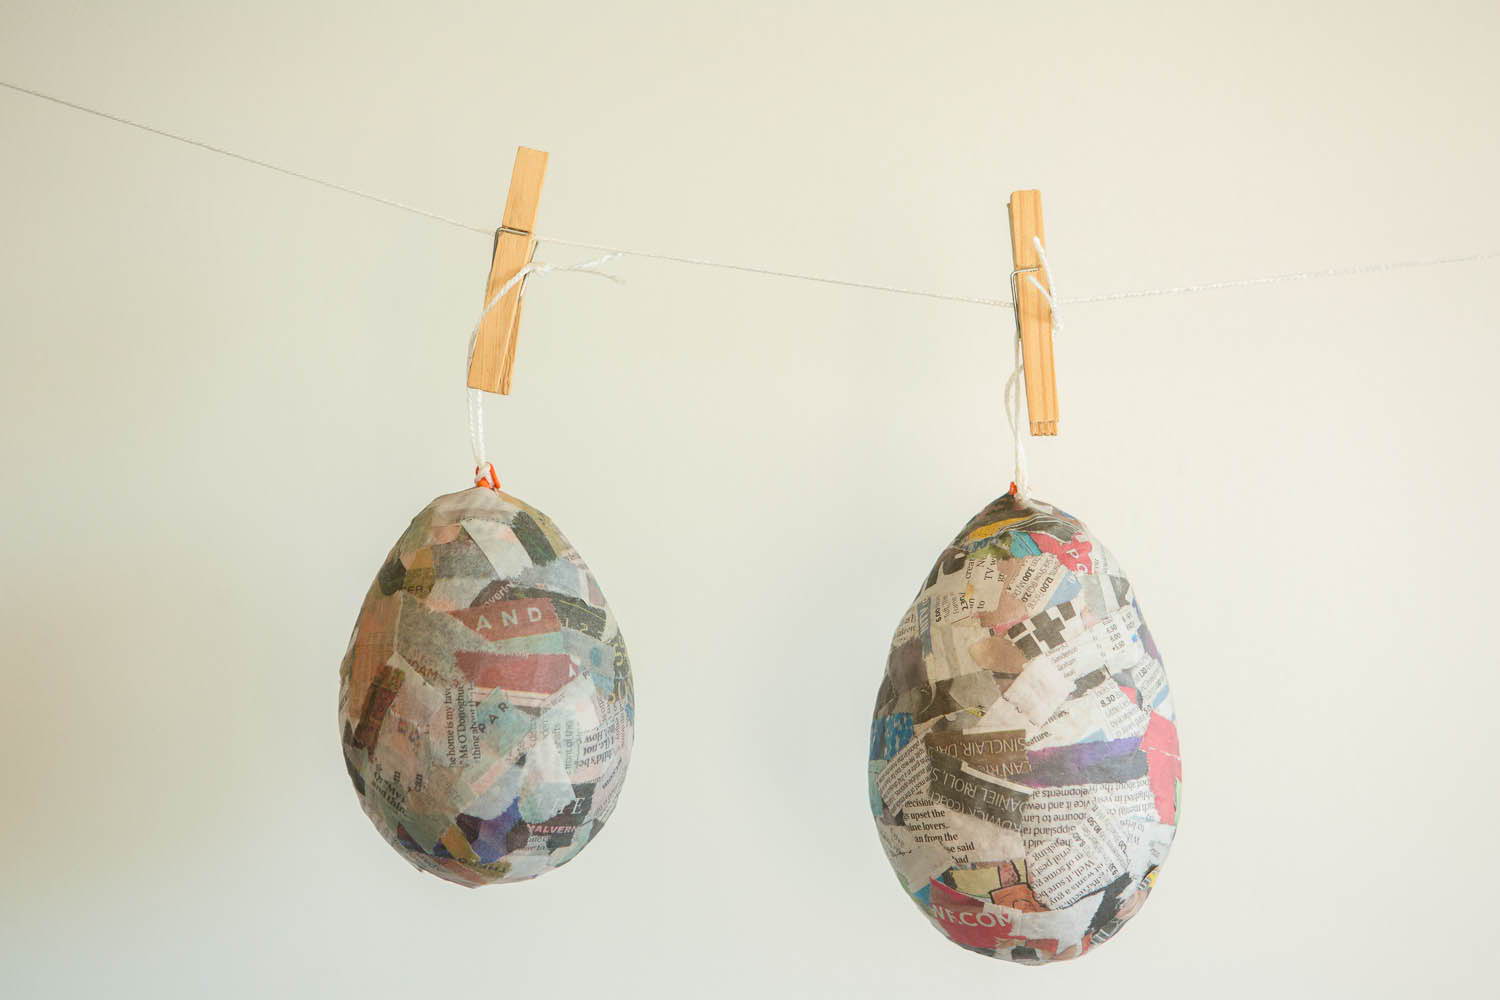 DIY Paper Mache Craft Project - Hanging Baloons